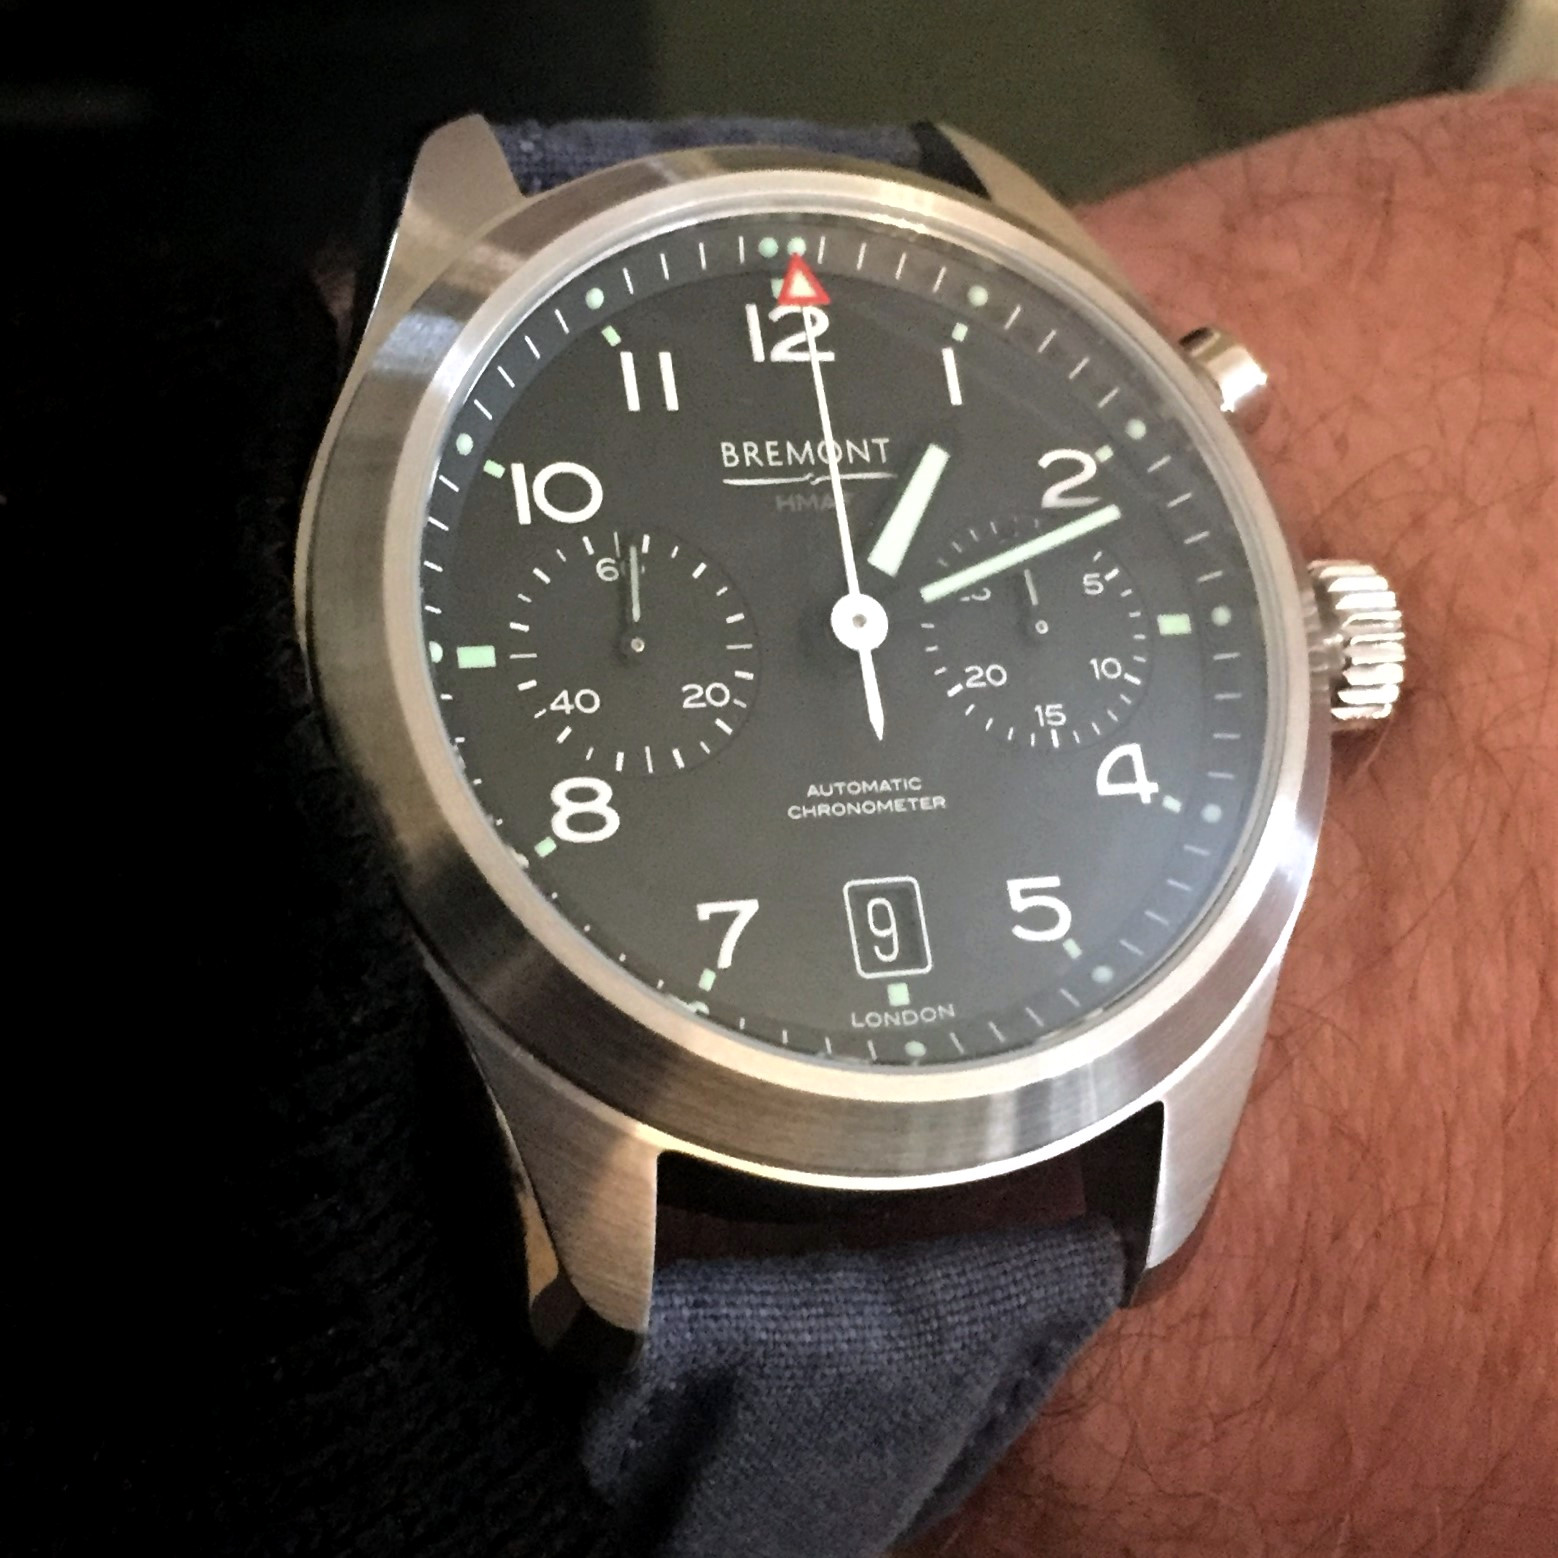 Bremont Armed Forced Collection Arrow at Bremont Townhouse 2019